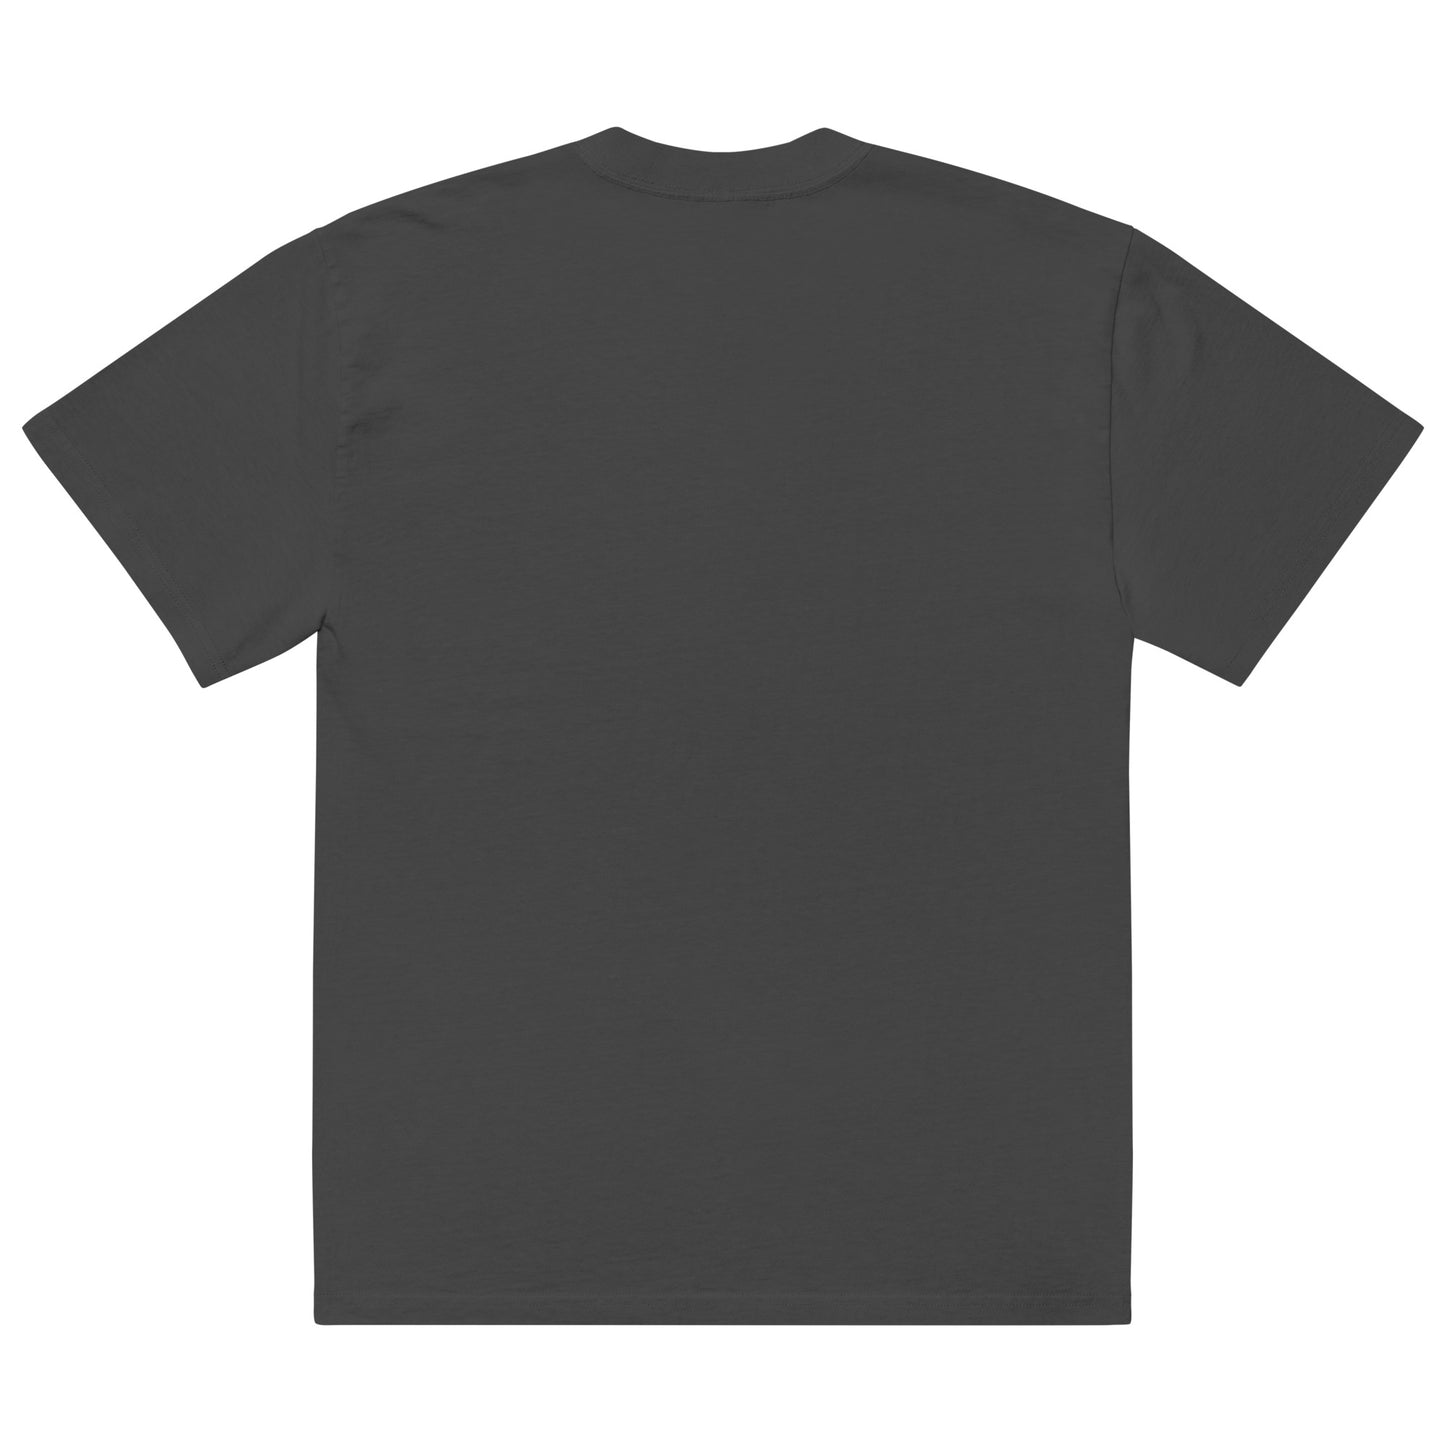 First NLR Pocket Embroidered (Black) Oversized faded t-shirt